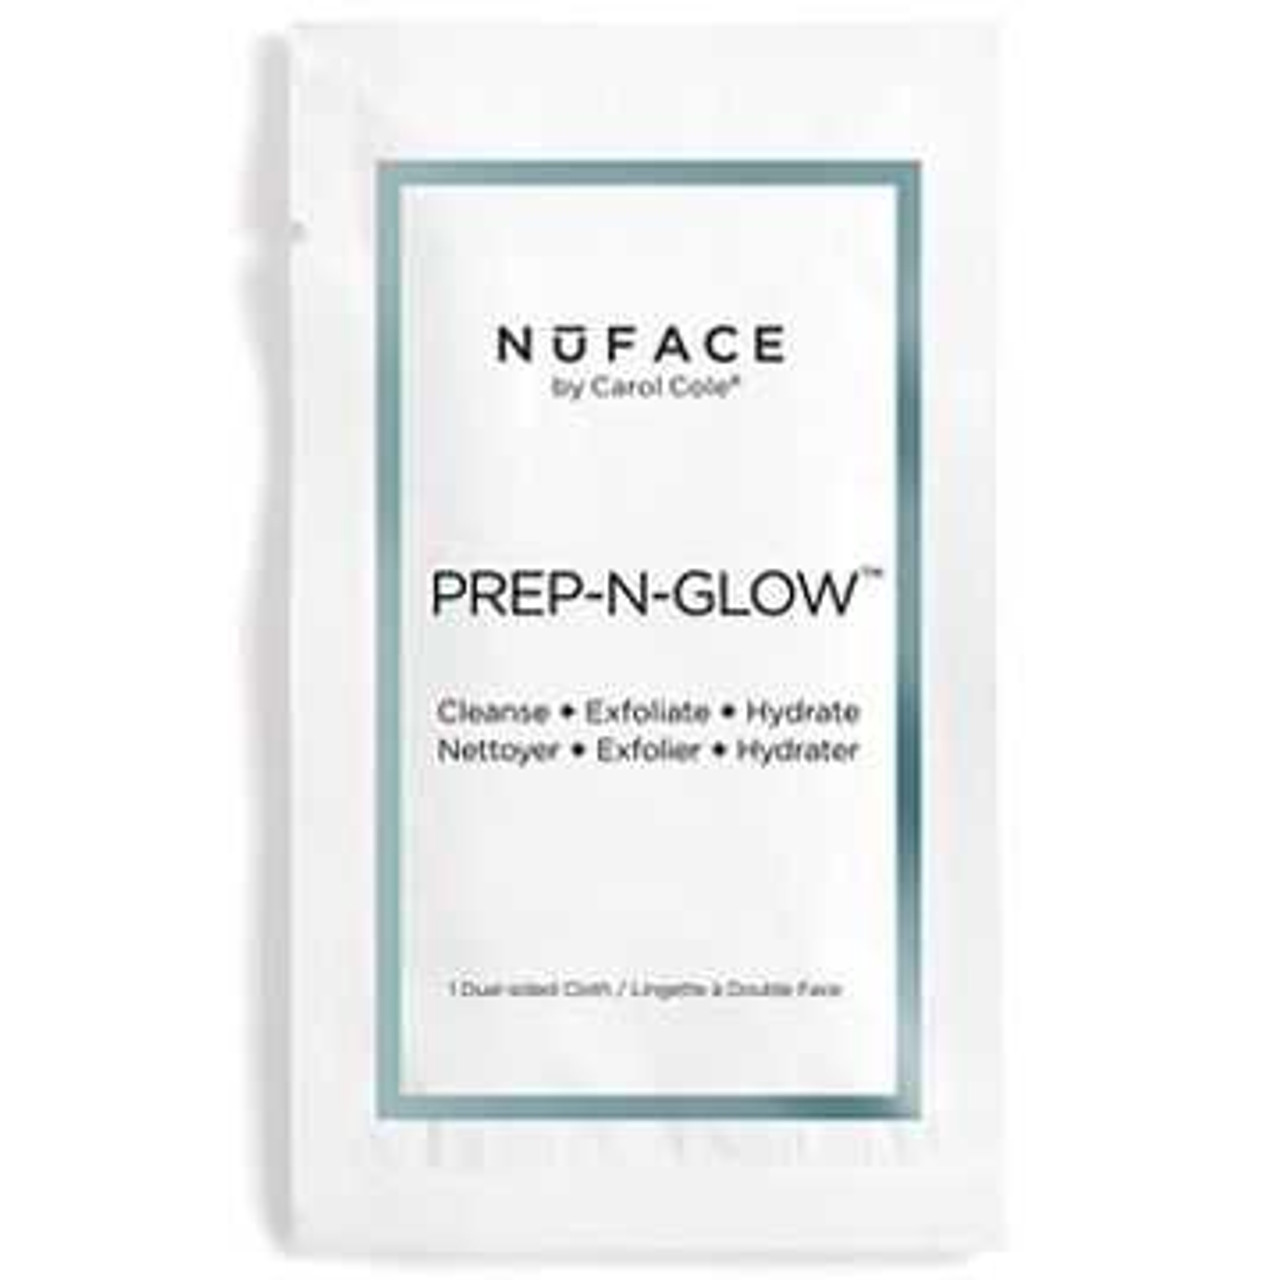 NuFace Prep-N-Glow Textured Cleansing Cloth - Free with $10 Purchase